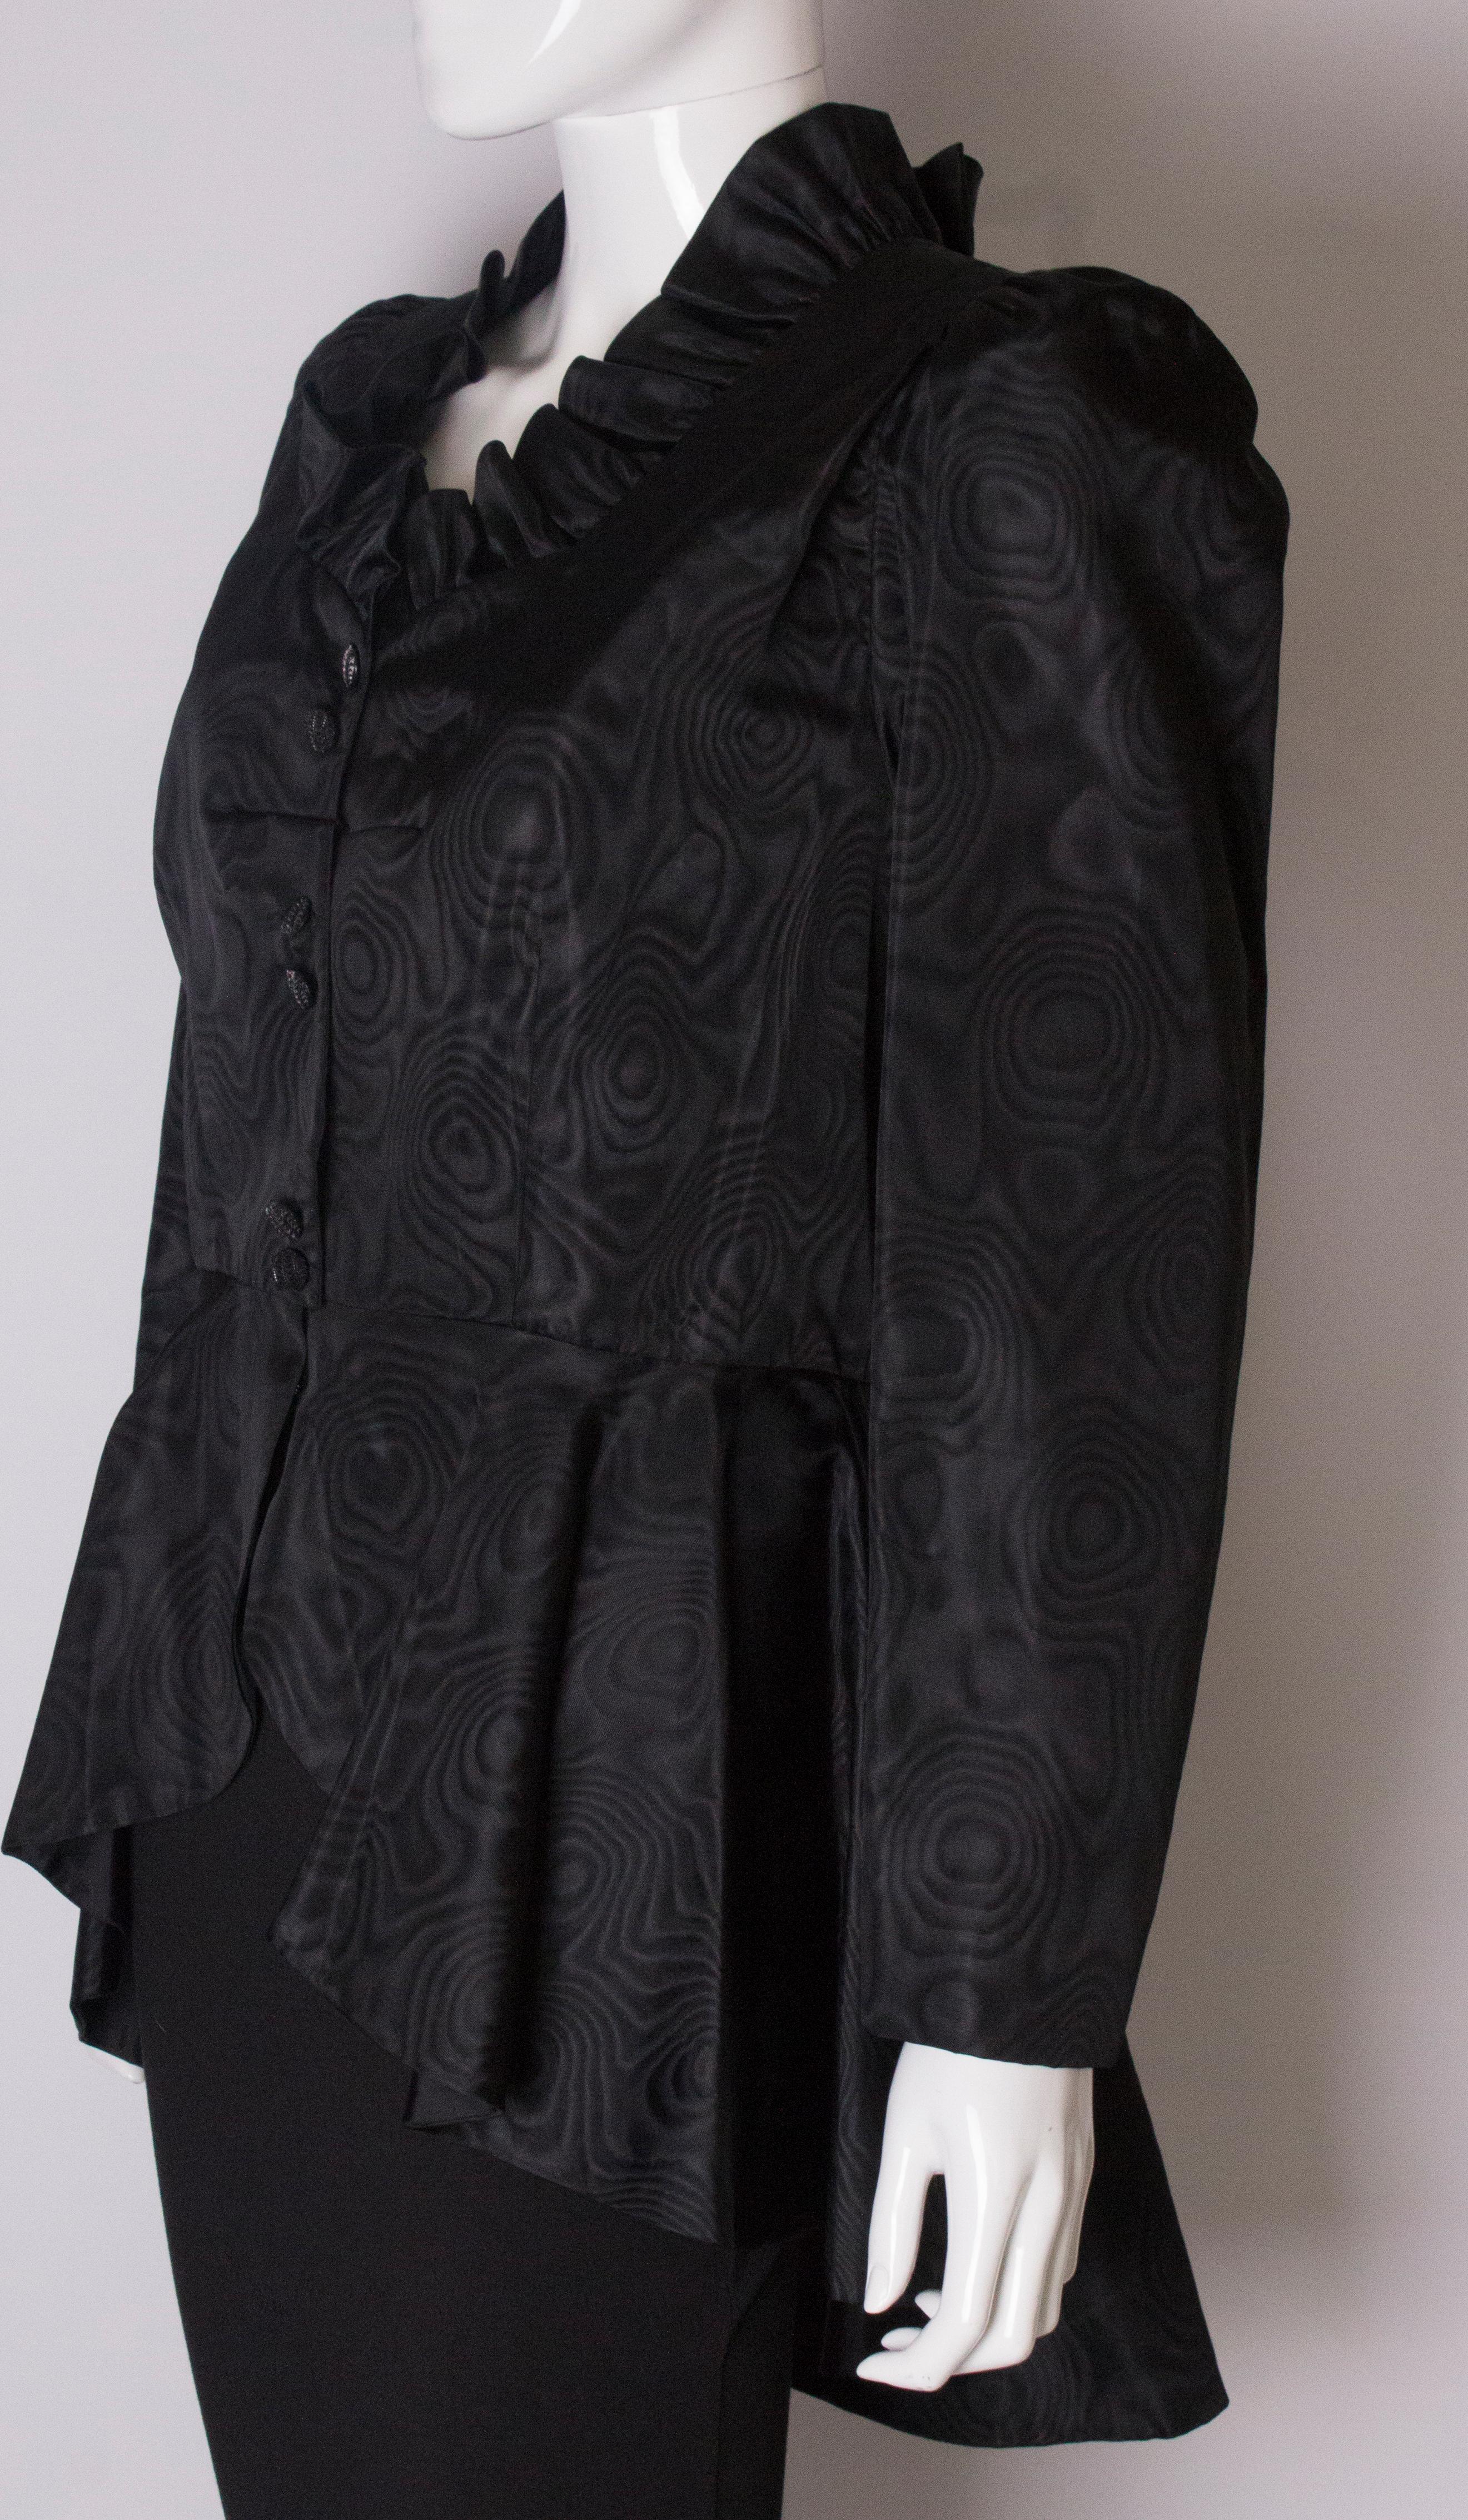 Black Moire Silk Vintage Jacket with Frill Edged Collar and Peplum In Good Condition For Sale In London, GB